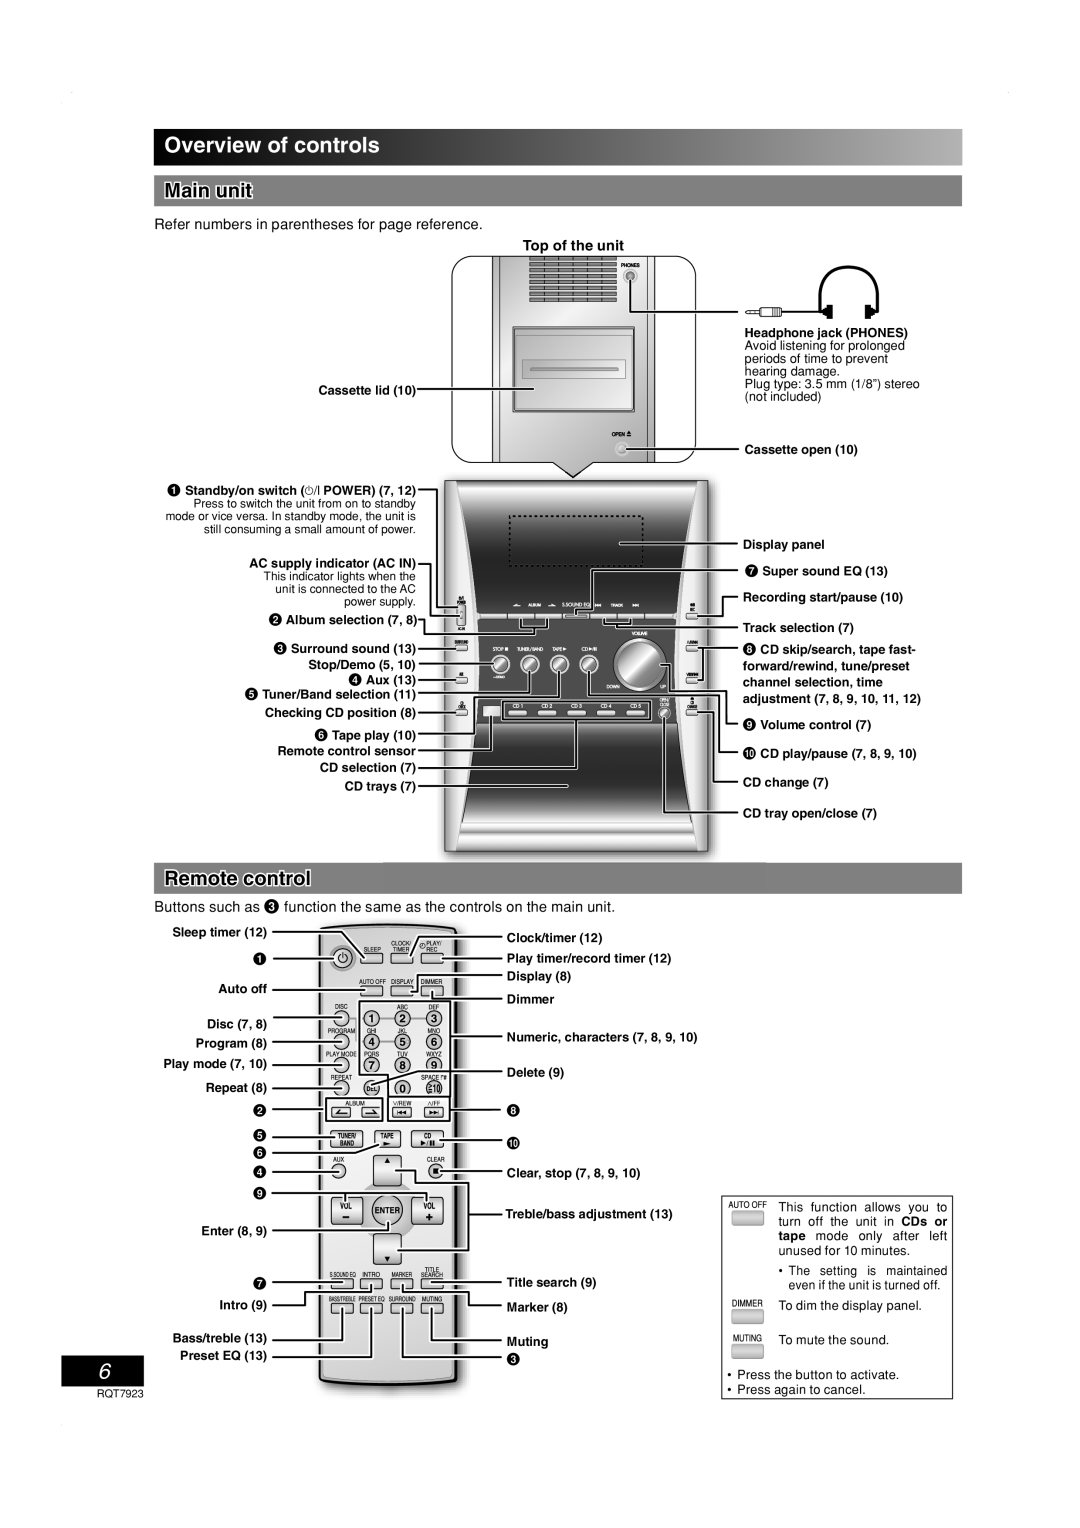 Panasonic SC-PM313 important safety instructions Overview of controls, Main unit, Remote control, 2 5 